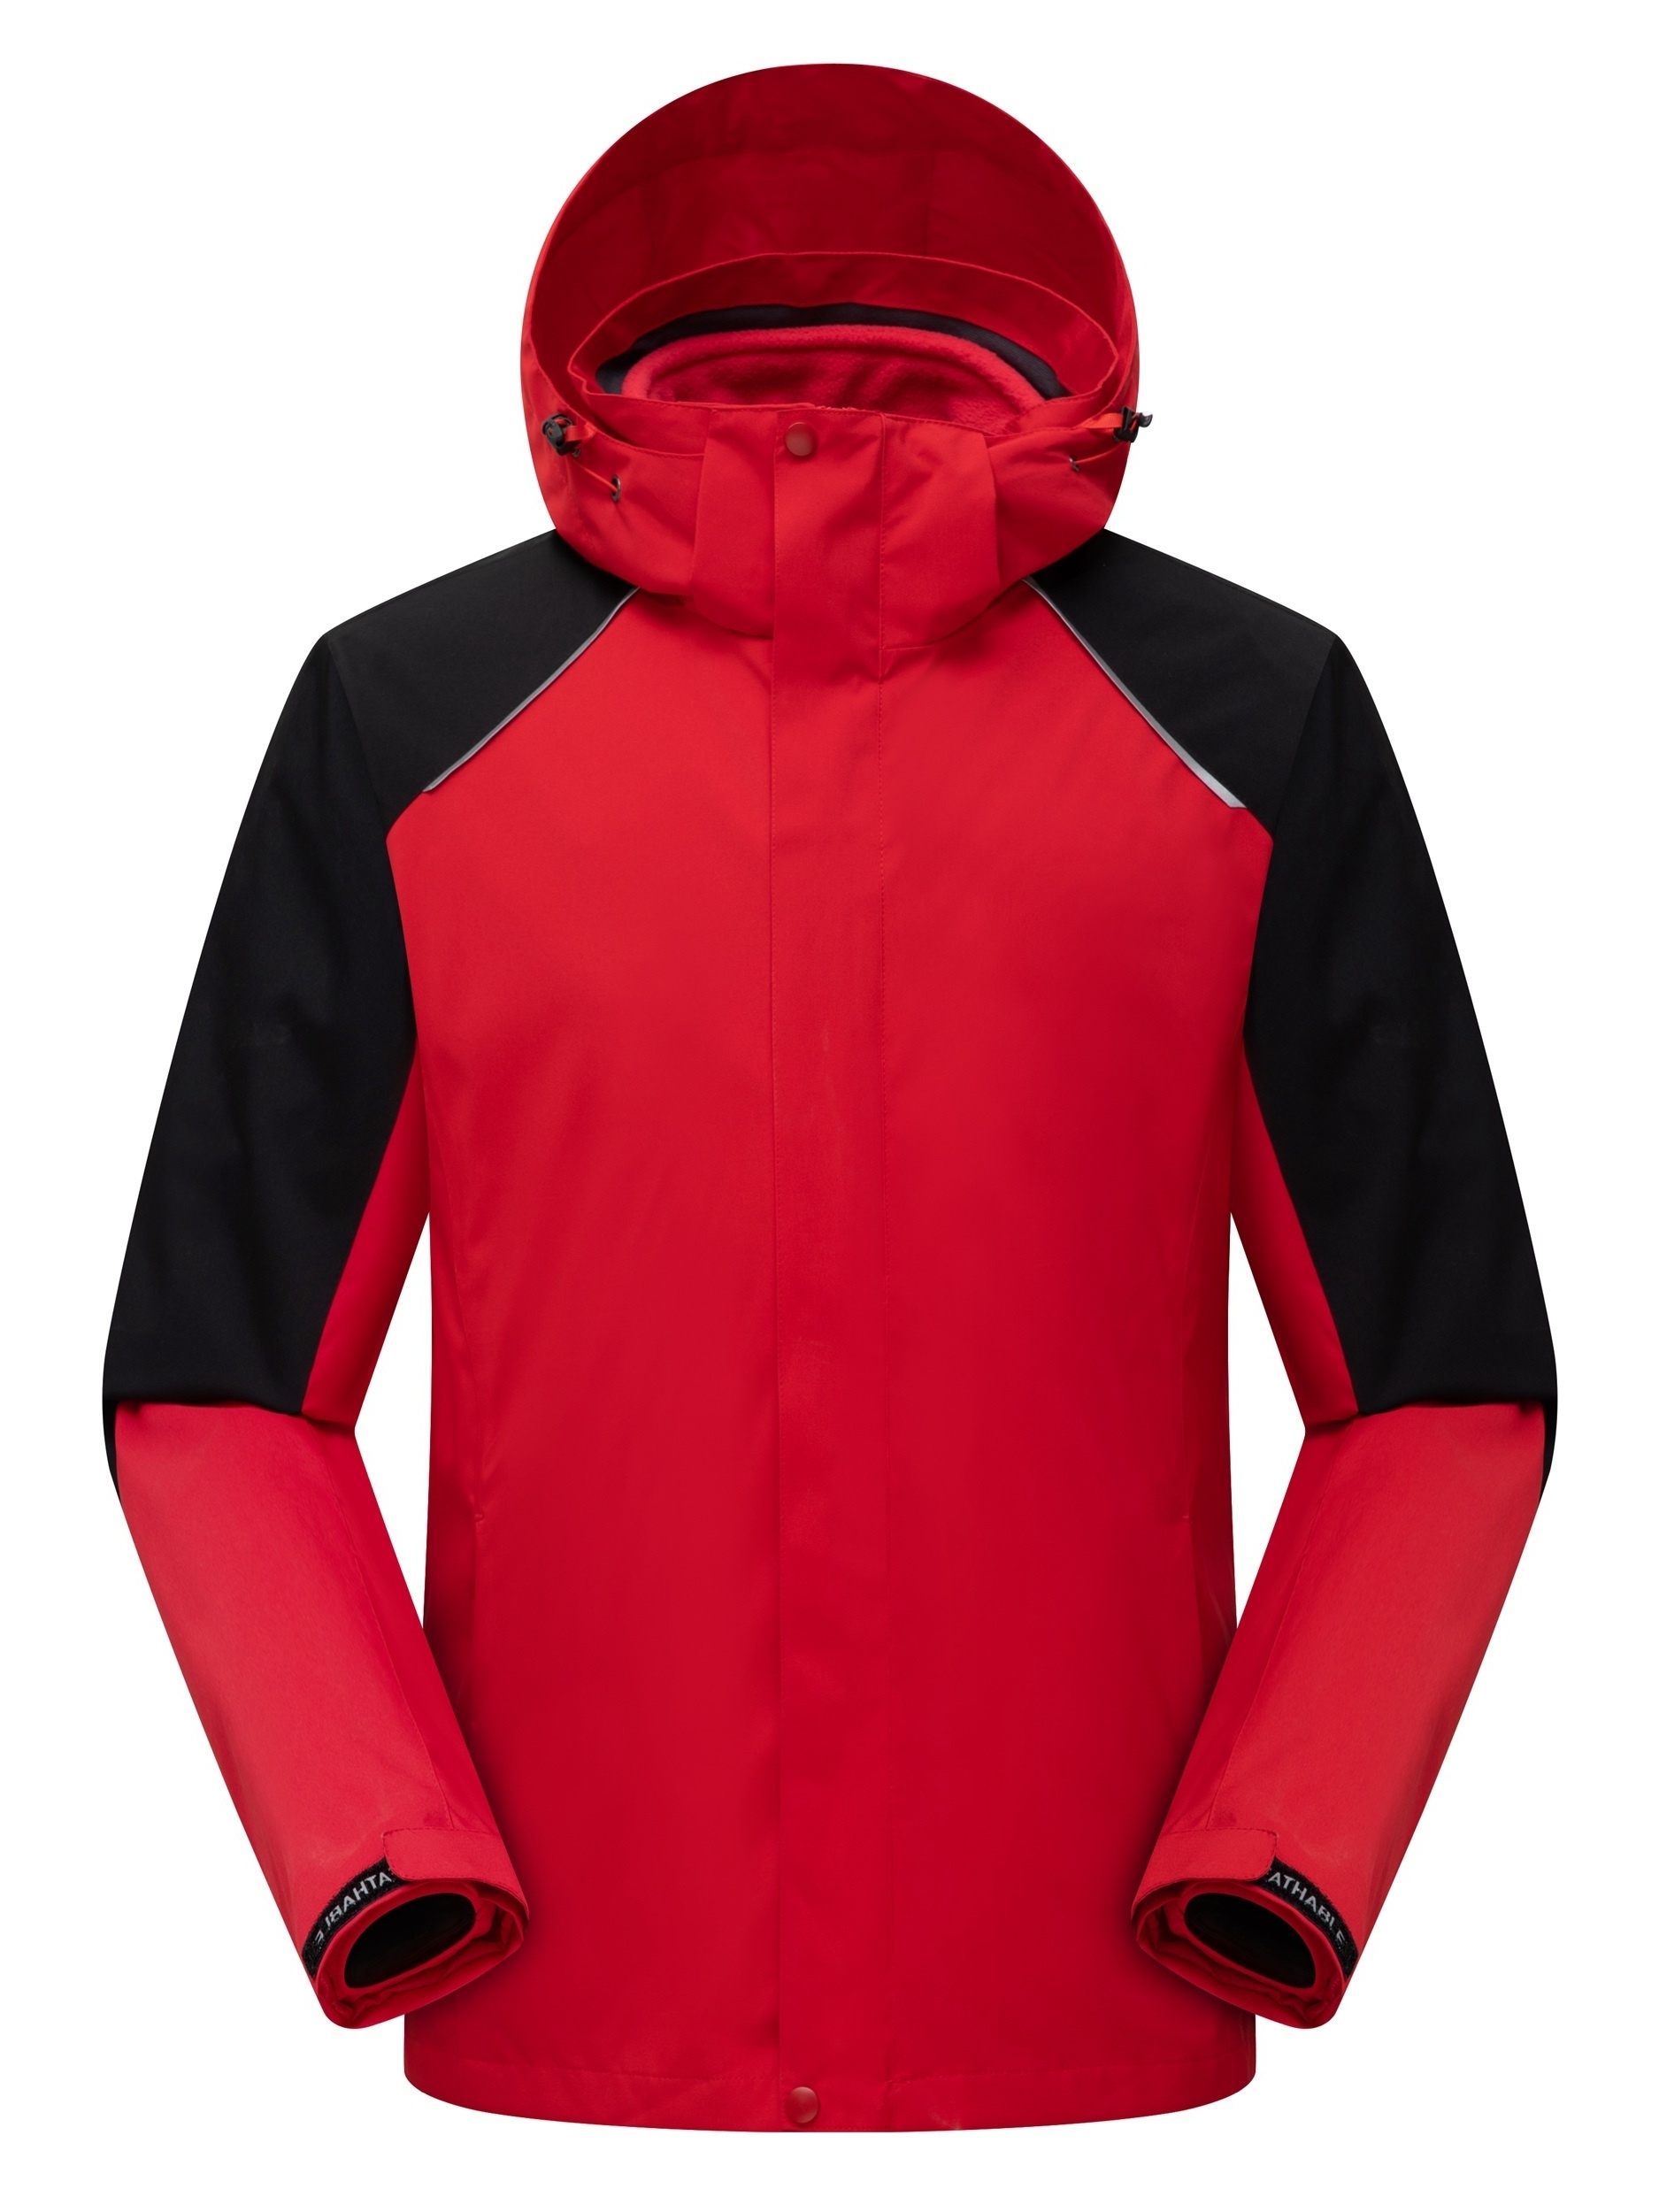 Waterproof and Windproof Men's Mountain Ski Jacket - Stay Dry and Warm  During Any Weather